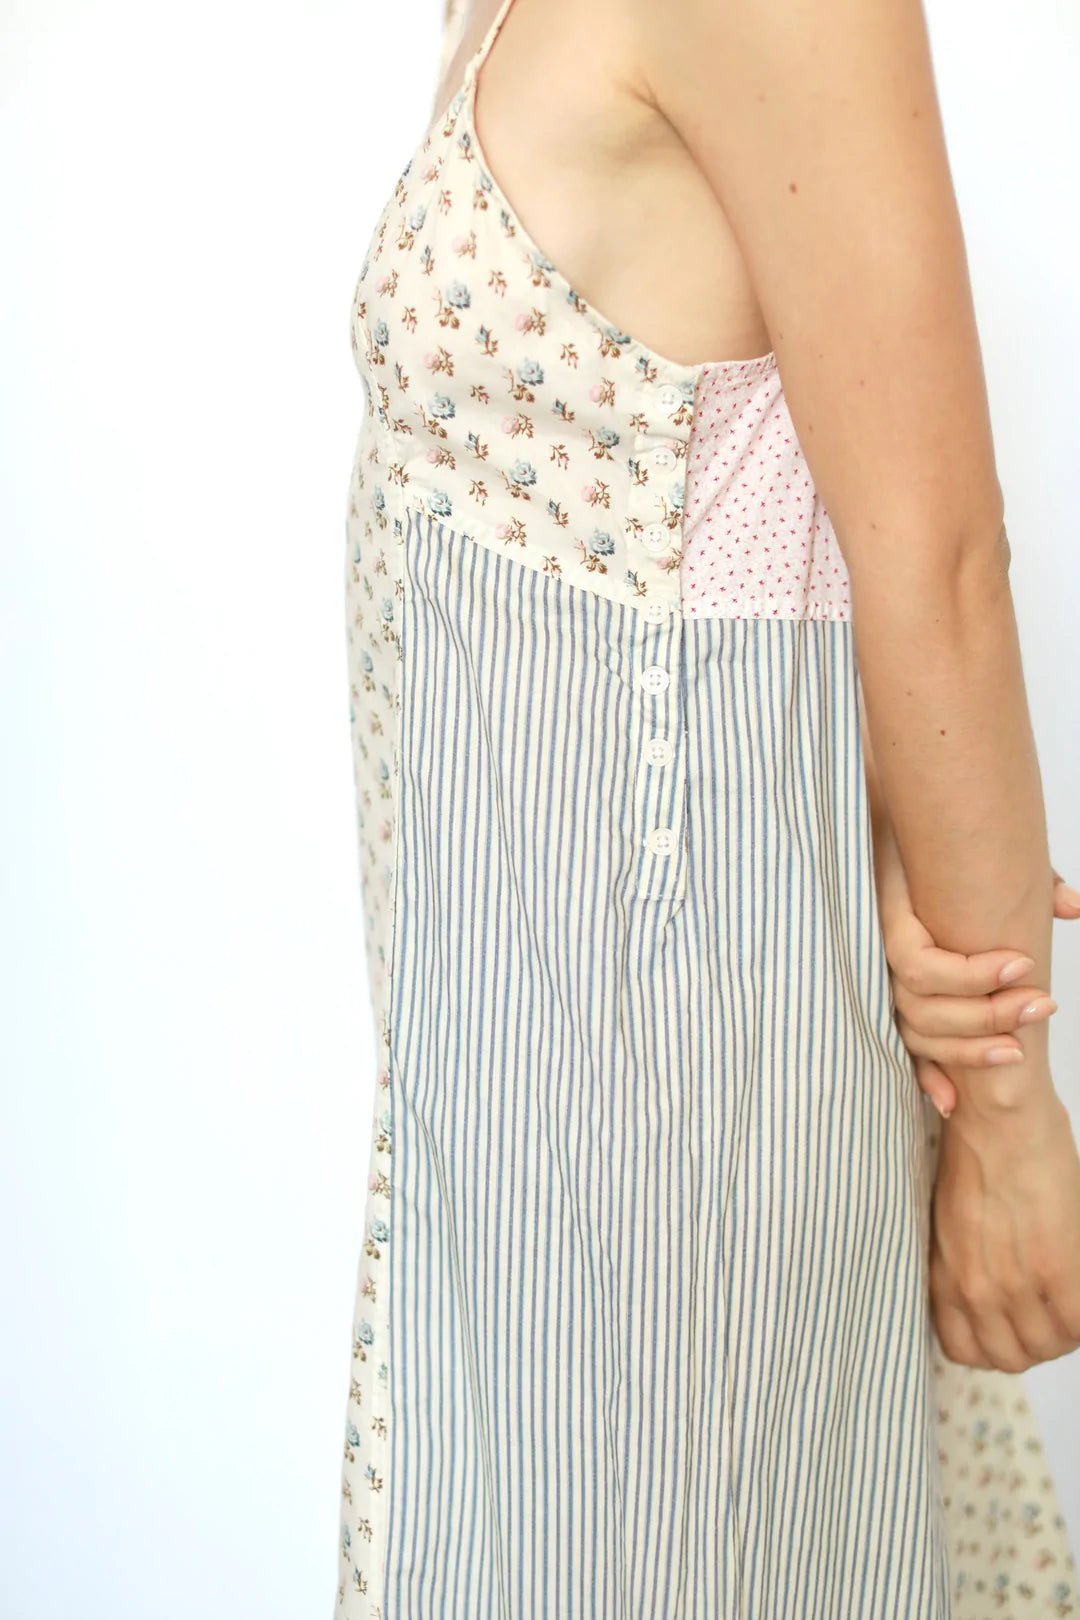 100% Organic Cotton Slip with Buttons - Homebody Denver